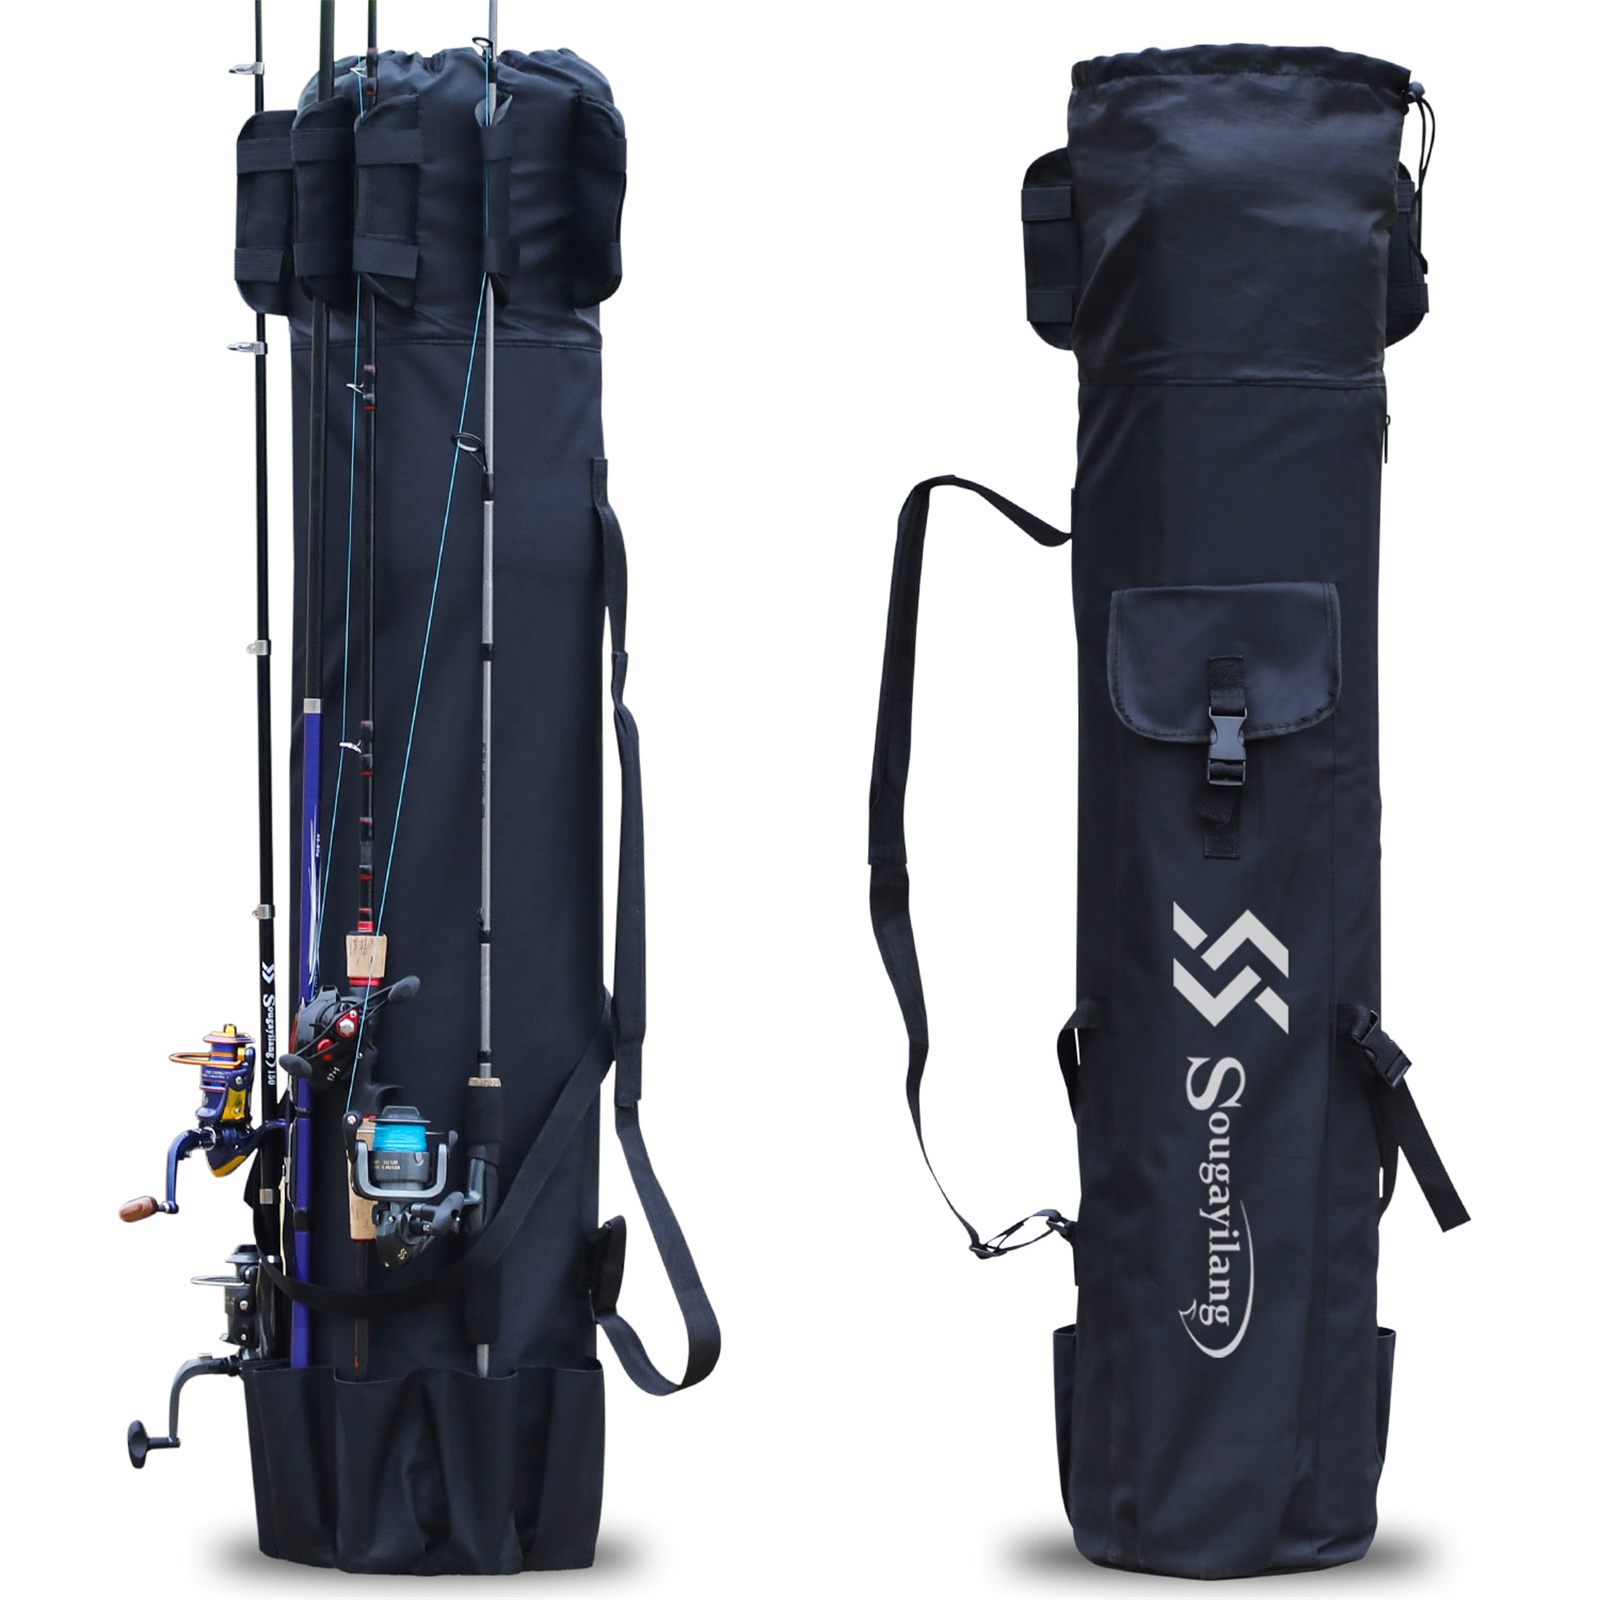 Outdoor canopy pole storage bag fishing rod bag fishing gear organizer bag  camping tent pole accessories backpack fishing bag